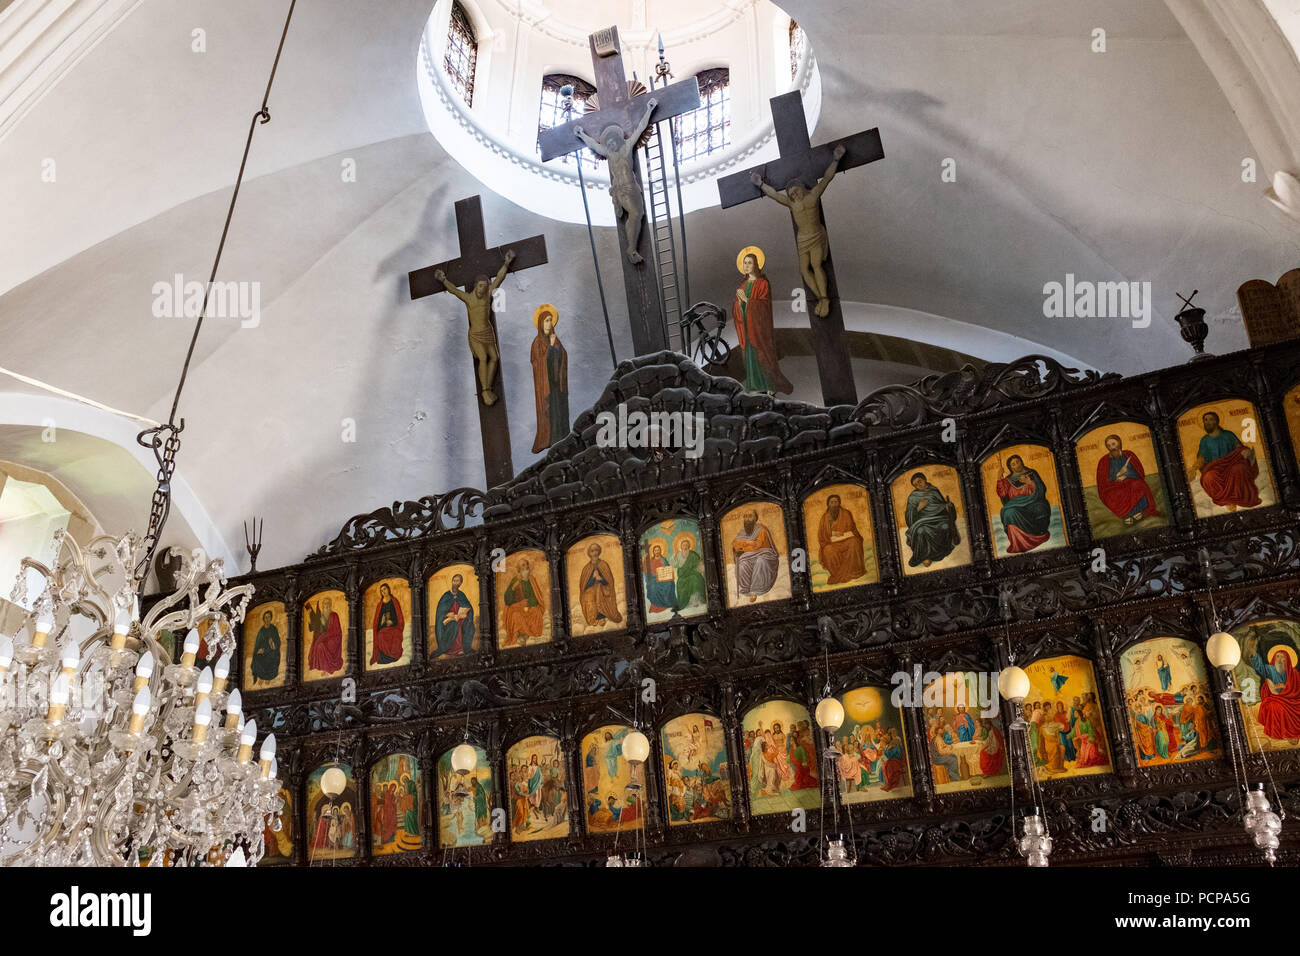 Interior of picturesque church, Holy Church of Saints Constantine and Helen situated in the scenic village of Tochni, Larnaca region of Cyprus Stock Photo